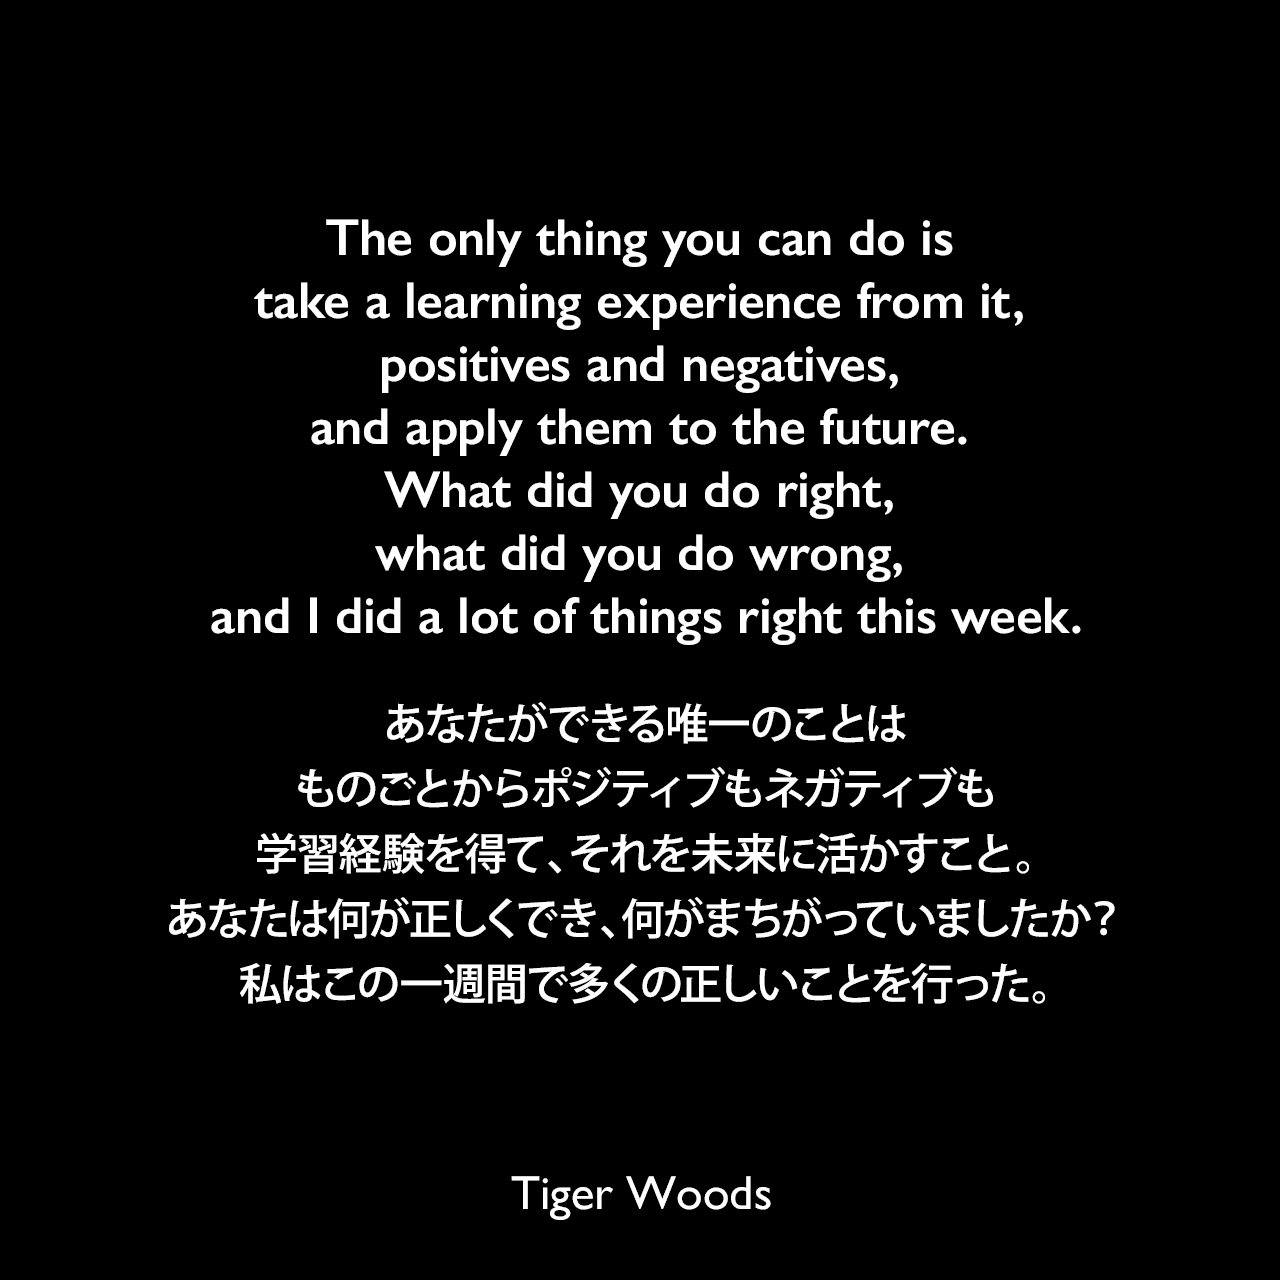 The only thing you can do is take a learning experience from it, positives and negatives, and apply them to the future. What did you do right, what did you do wrong, and I did a lot of things right this week.あなたができる唯一のことは、ものごとからポジティブもネガティブも学習経験を得て、それを未来に活かすこと。あなたは何が正しくでき、何がまちがっていましたか？私はこの一週間で多くの正しいことを行った。